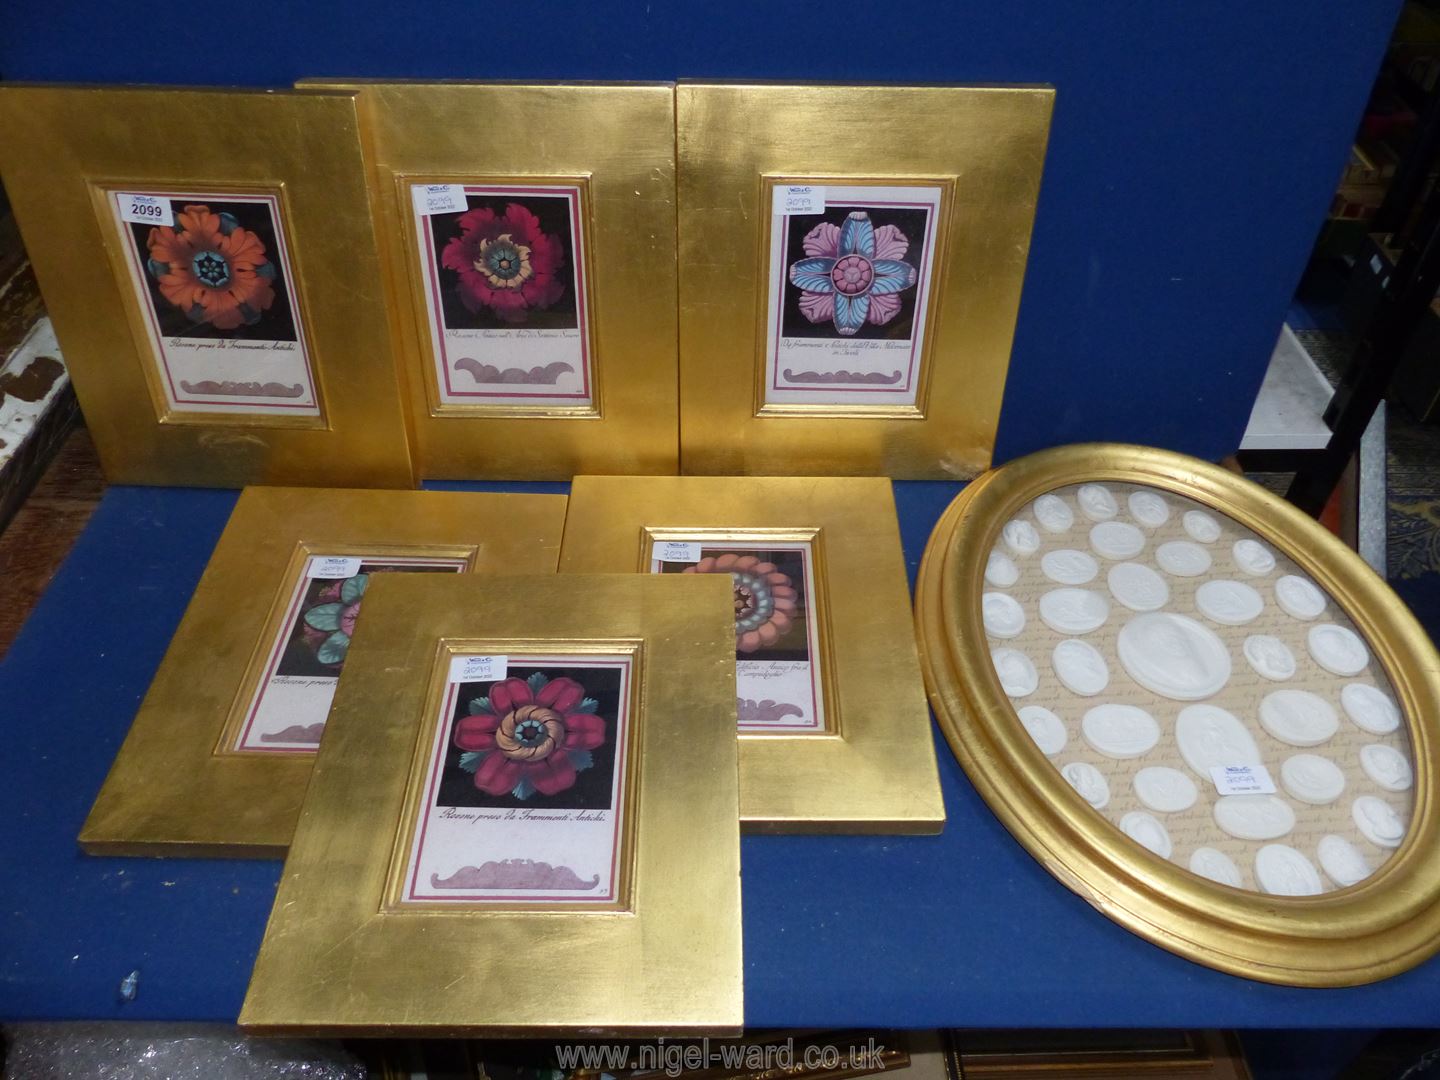 Six framed prints depicting Rose Window taken from ancient fragments,